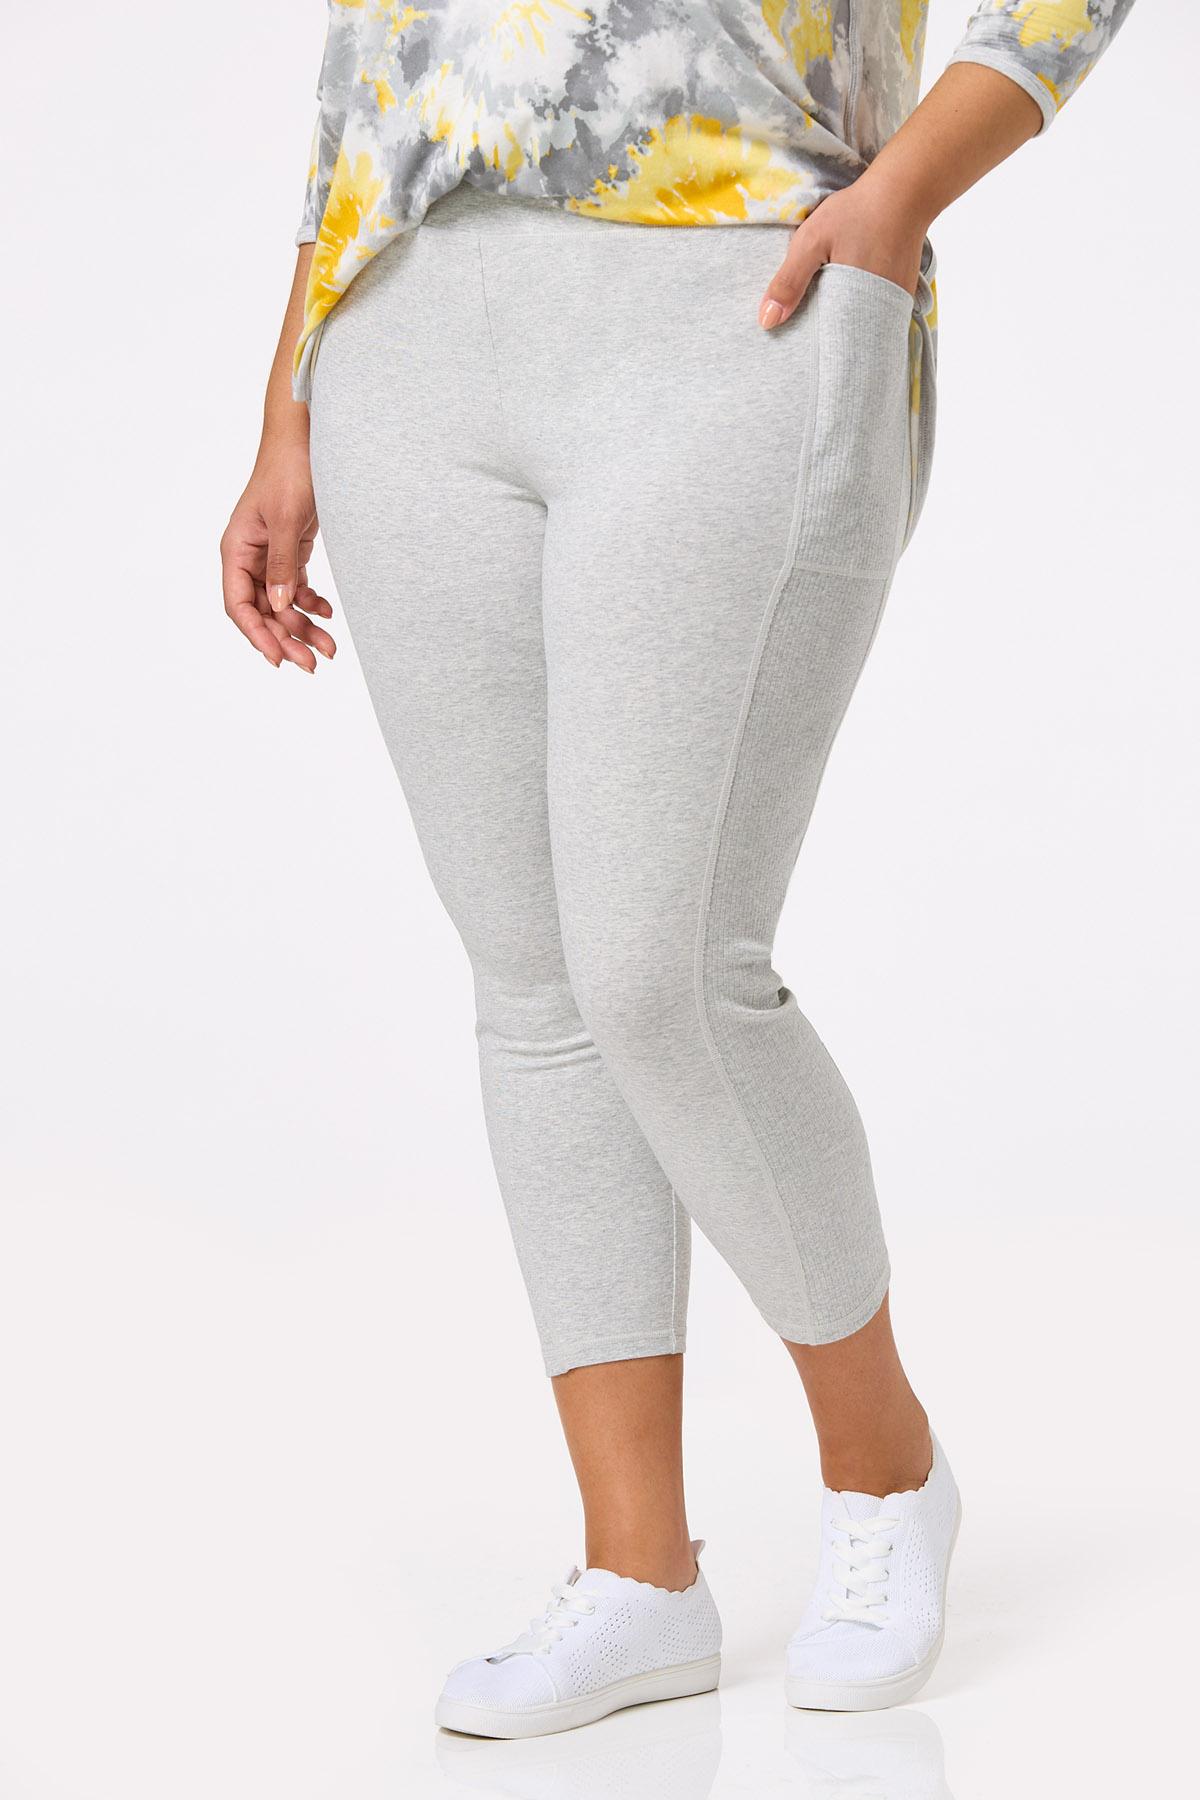 Cato Fashions  Cato Plus Size Ribbed Cropped Leggings